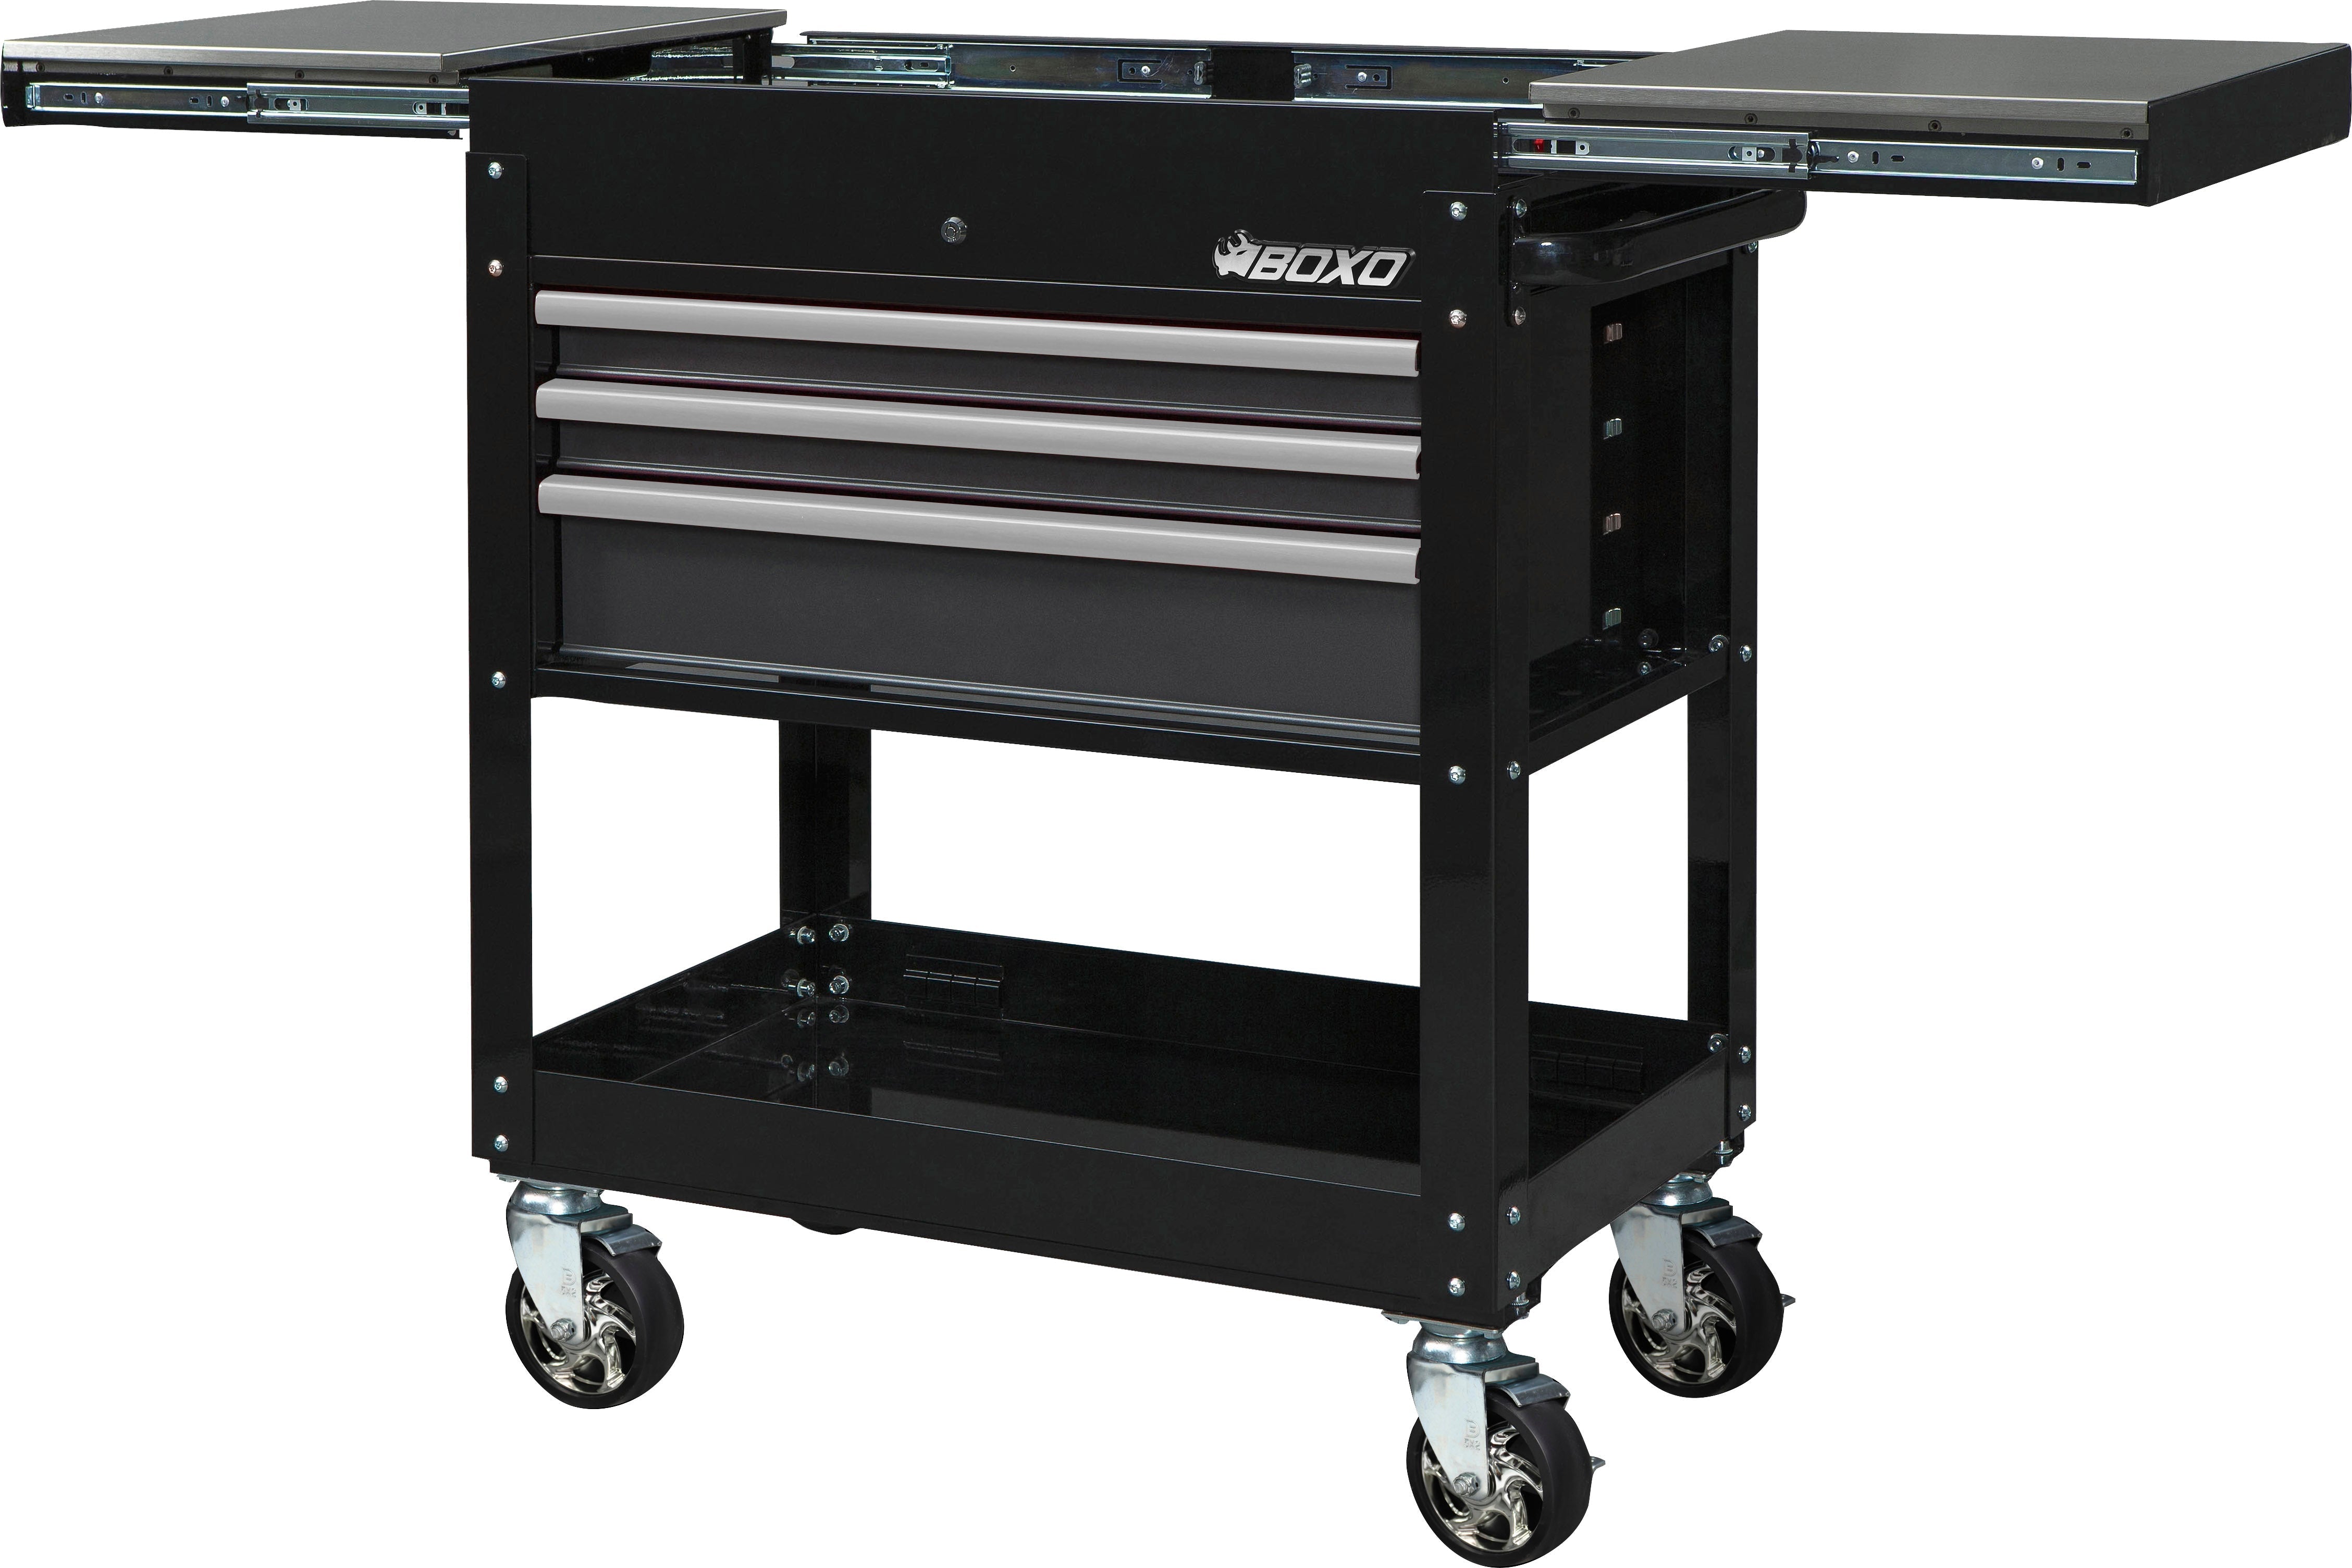 BOXO 34" 3 Drawer Slide Top Service Cart with Drawer Trim Pack - Black Body & Trim Colour options